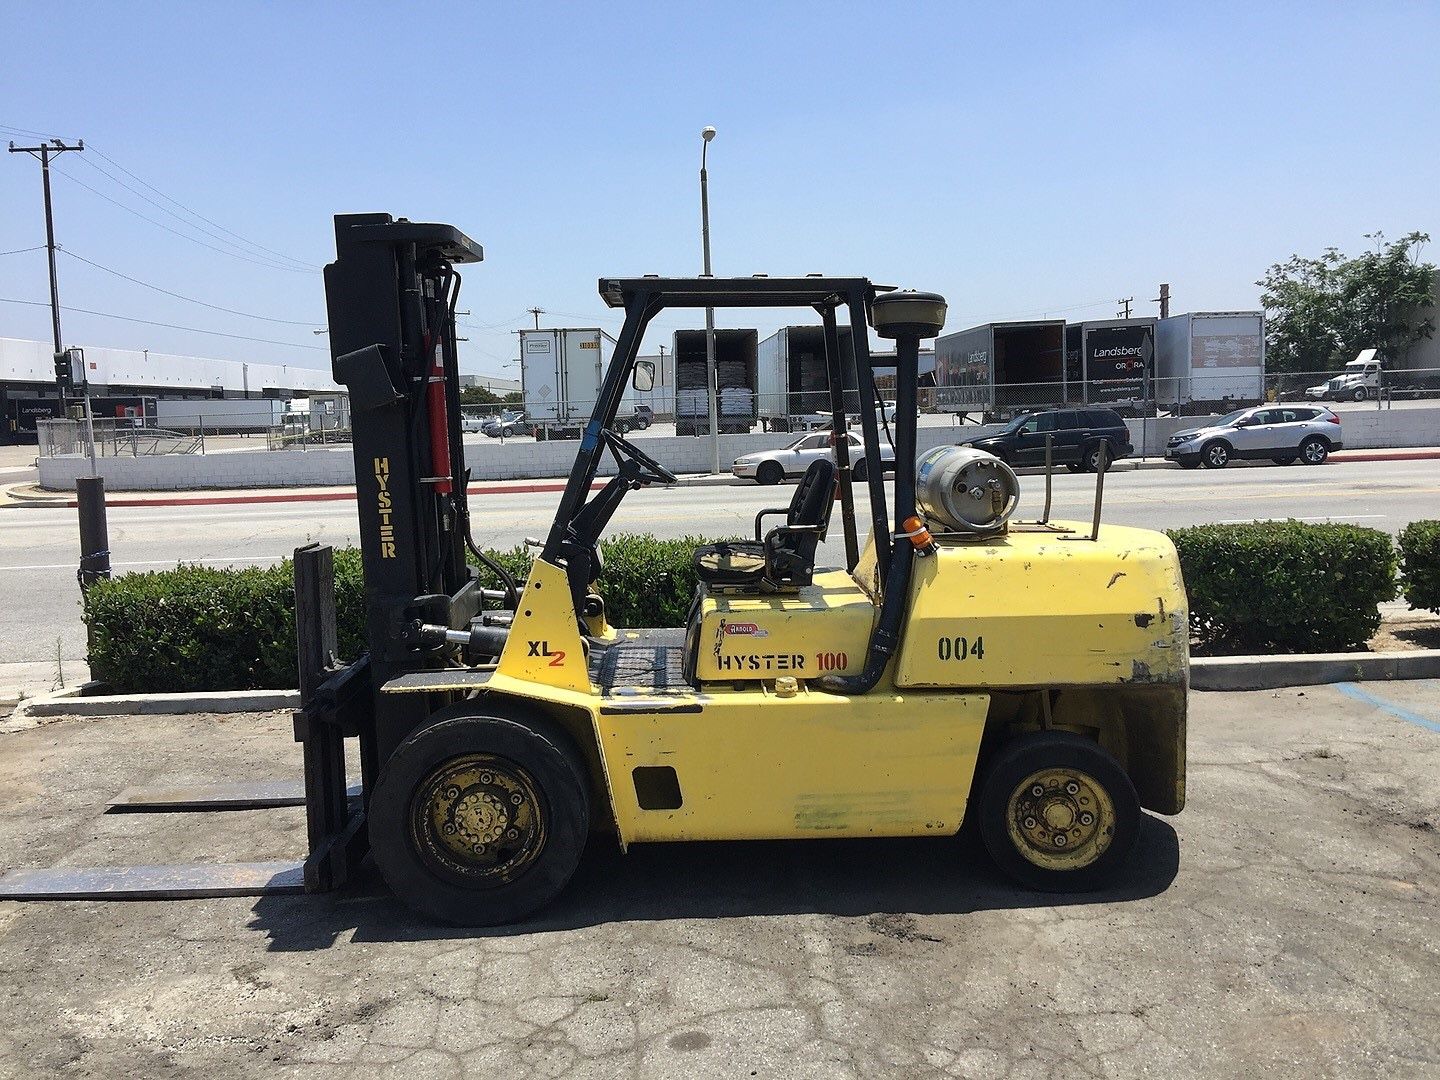 2000 hyster 10,000lbs pneumatic tires 3 stage side shift propane engine forklift